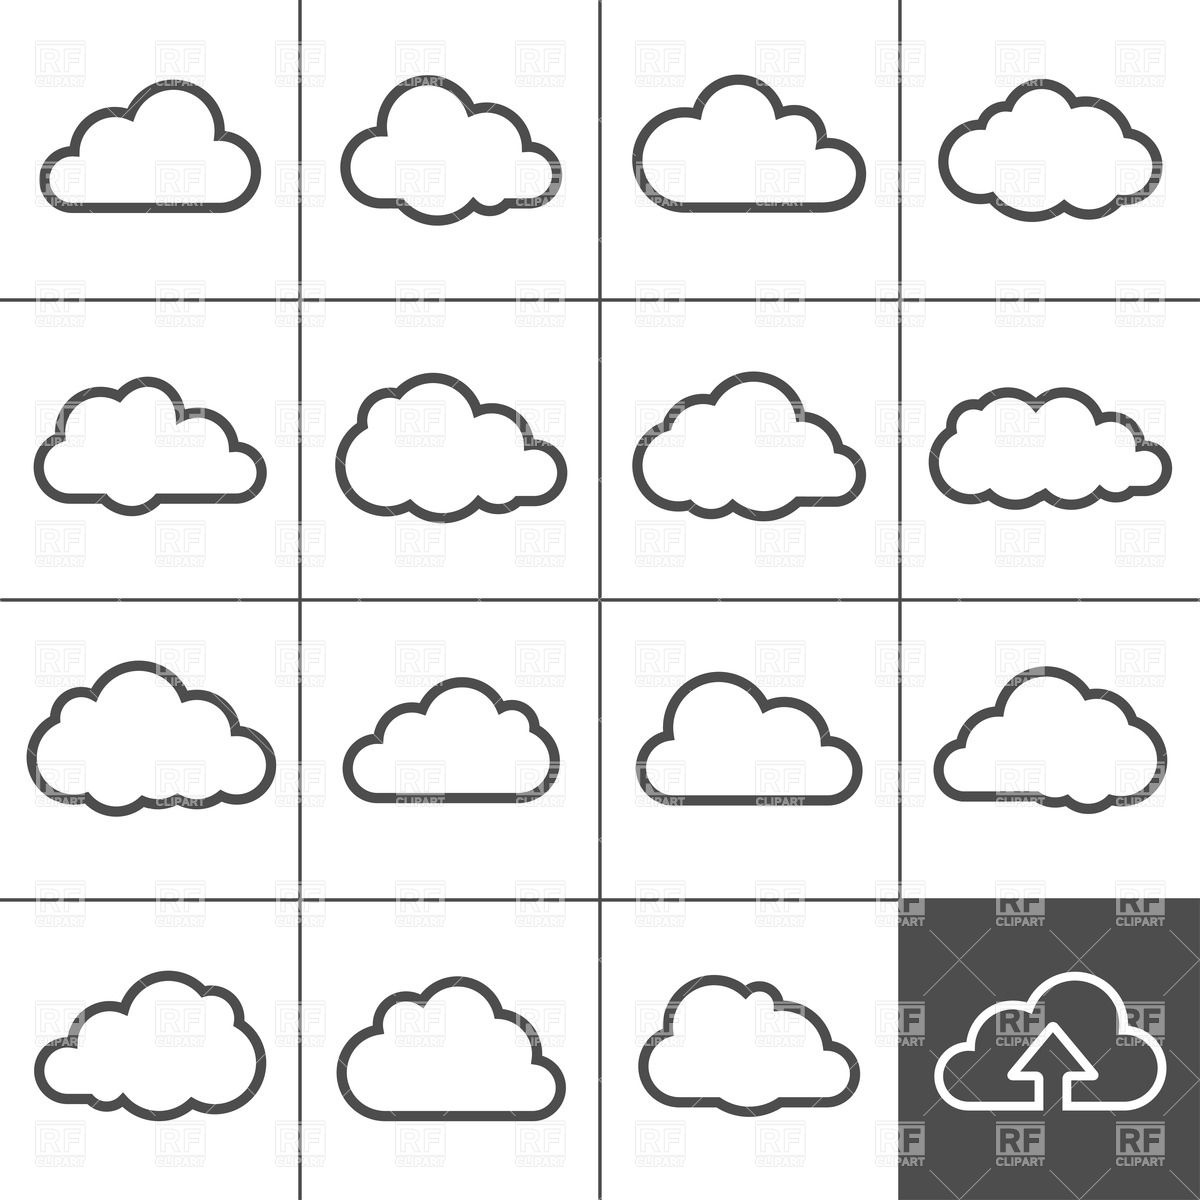 Cloud Shapes Collection Download Royalty Free Vector Clipart  Eps